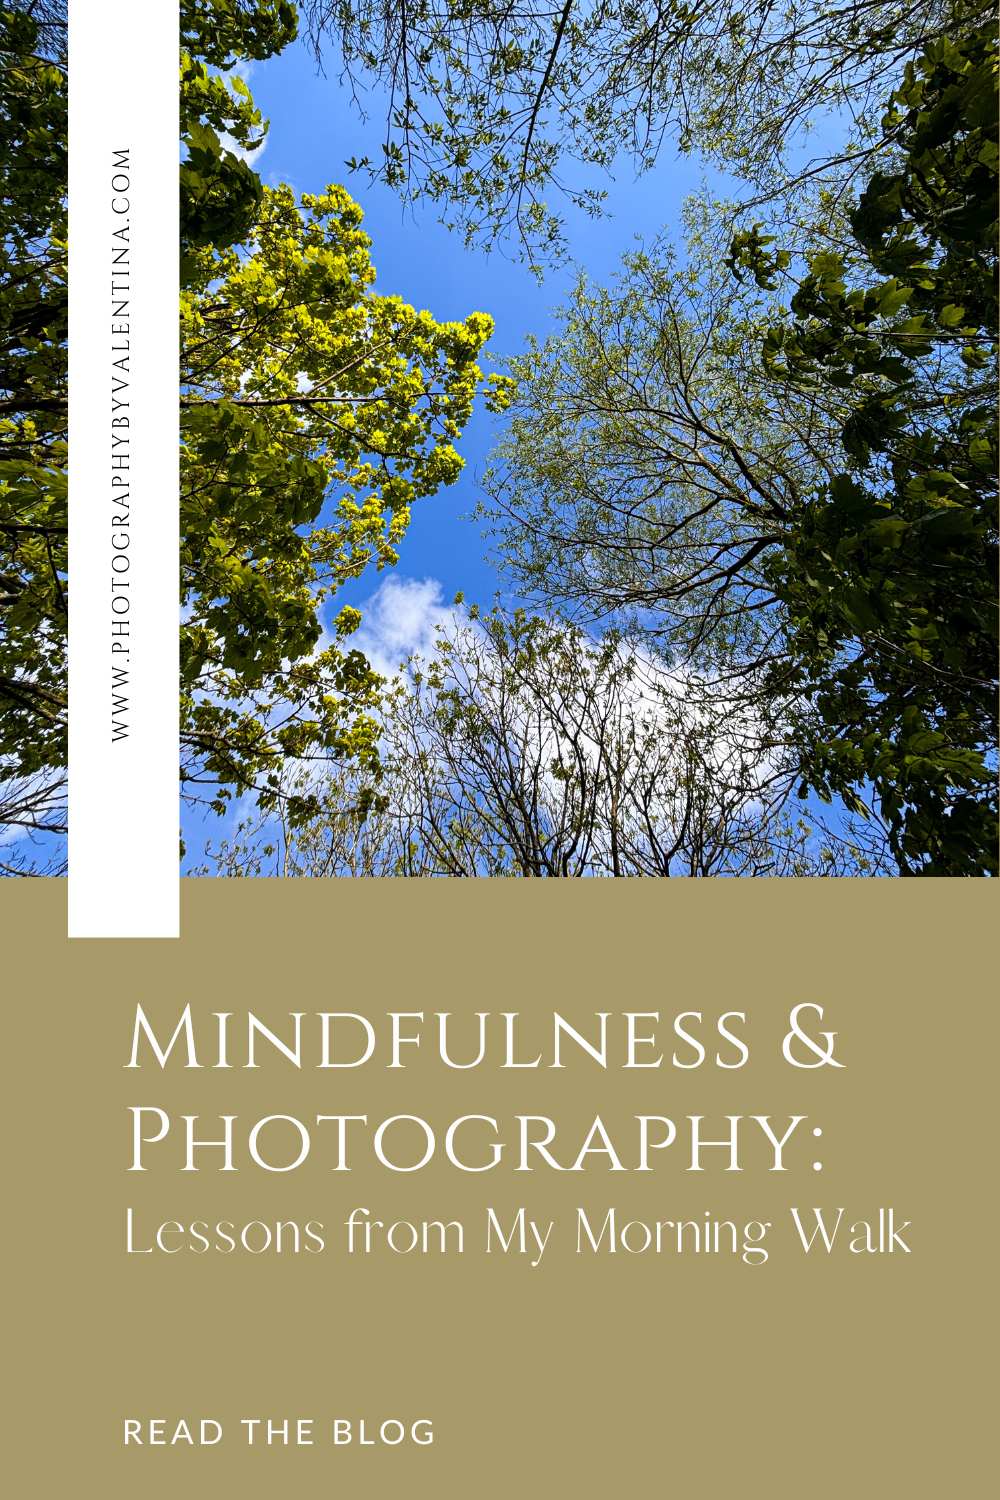 Mindfulness and photography: lessons from my morning walk